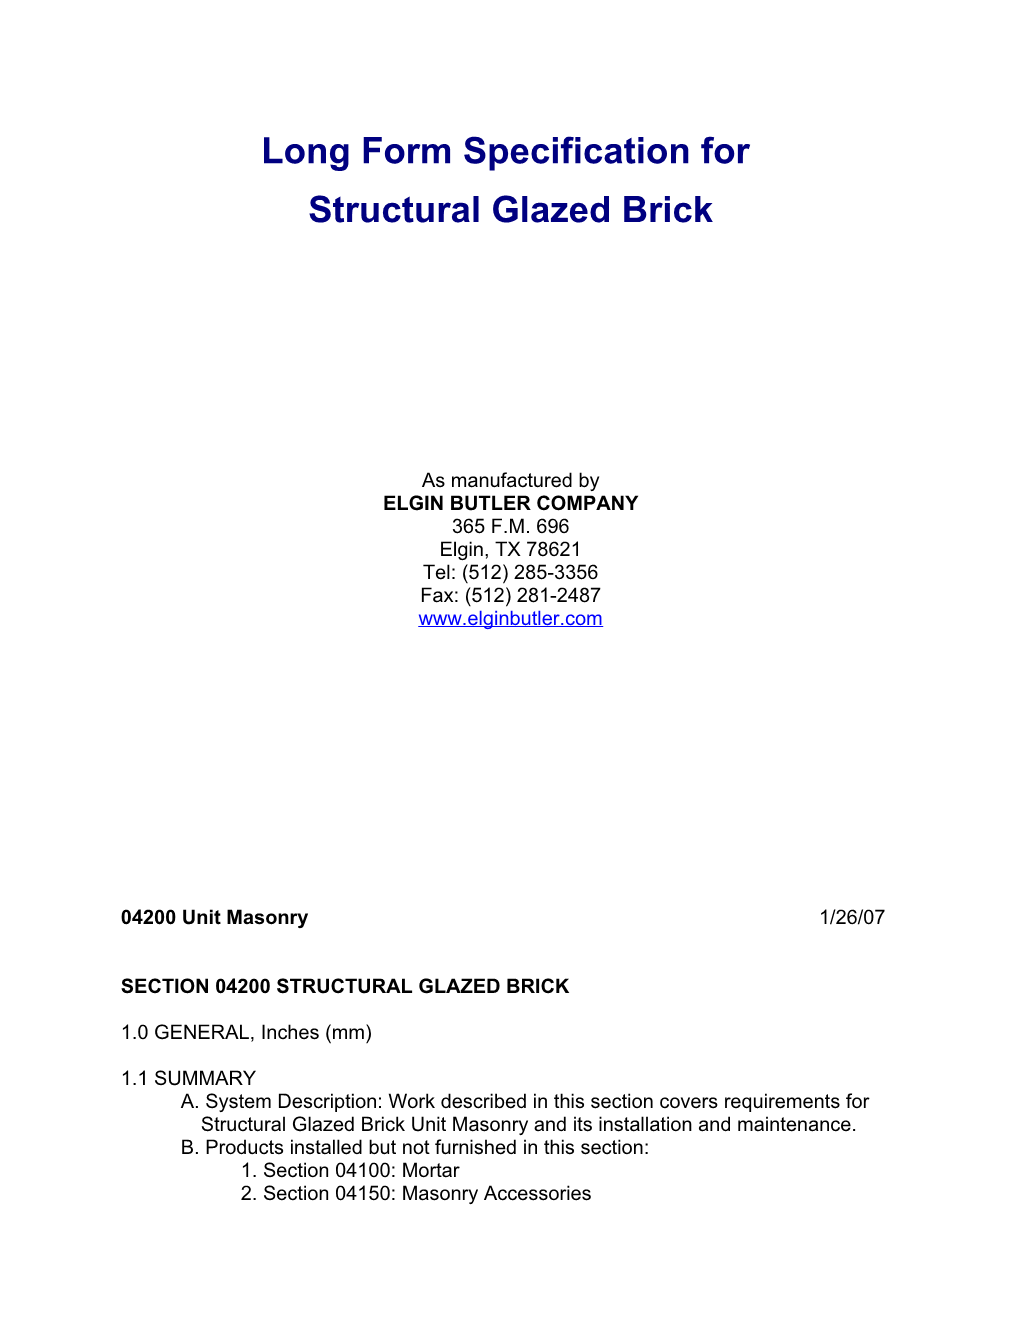 Long Form Specifications for Structural Glazed Brick